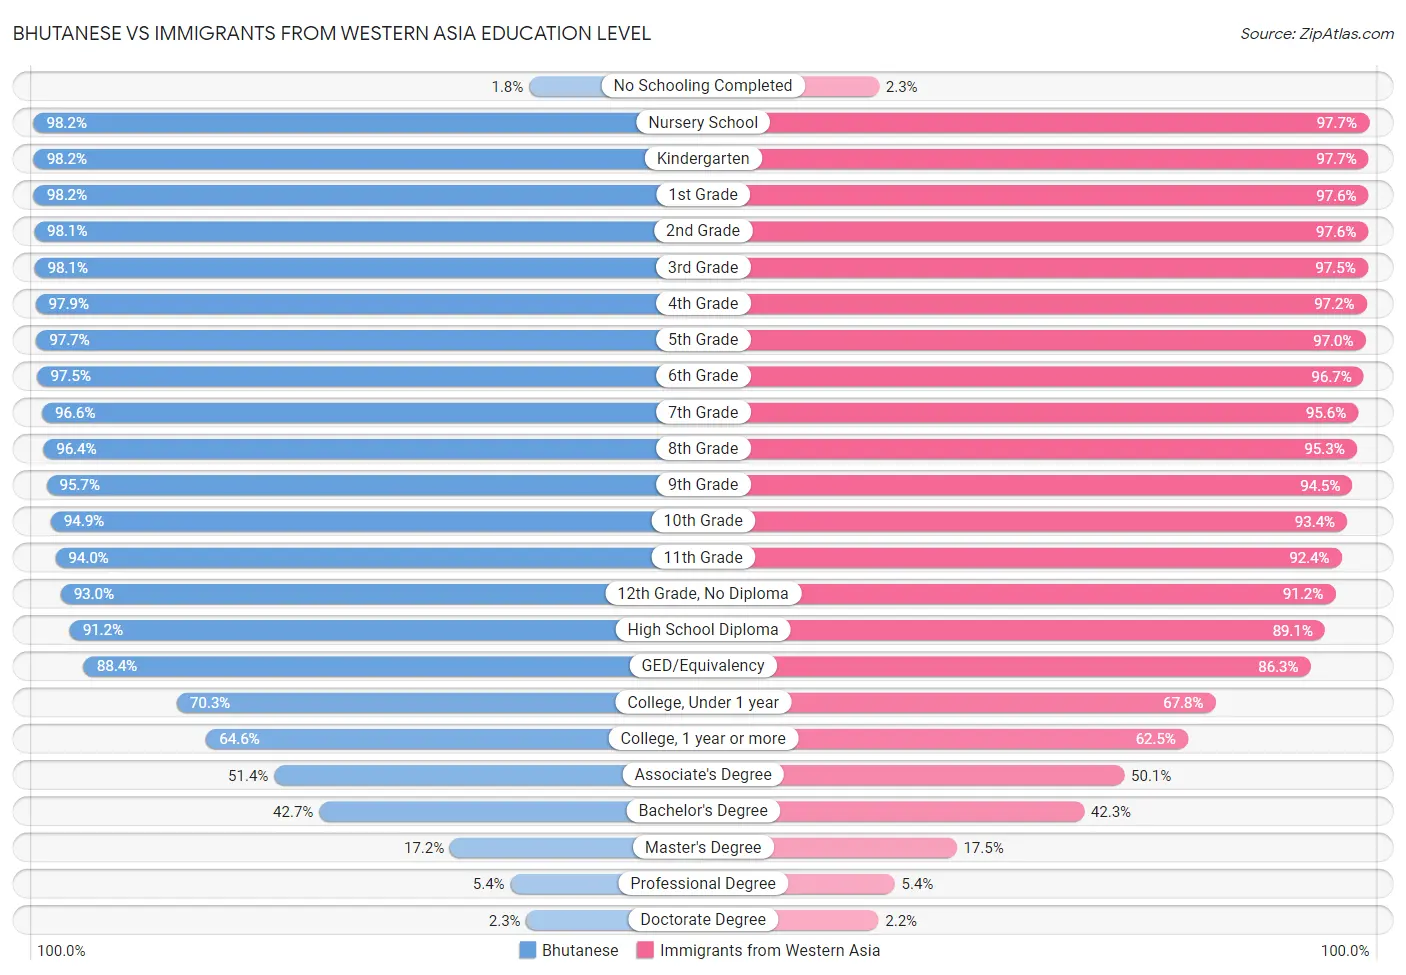 Bhutanese vs Immigrants from Western Asia Education Level